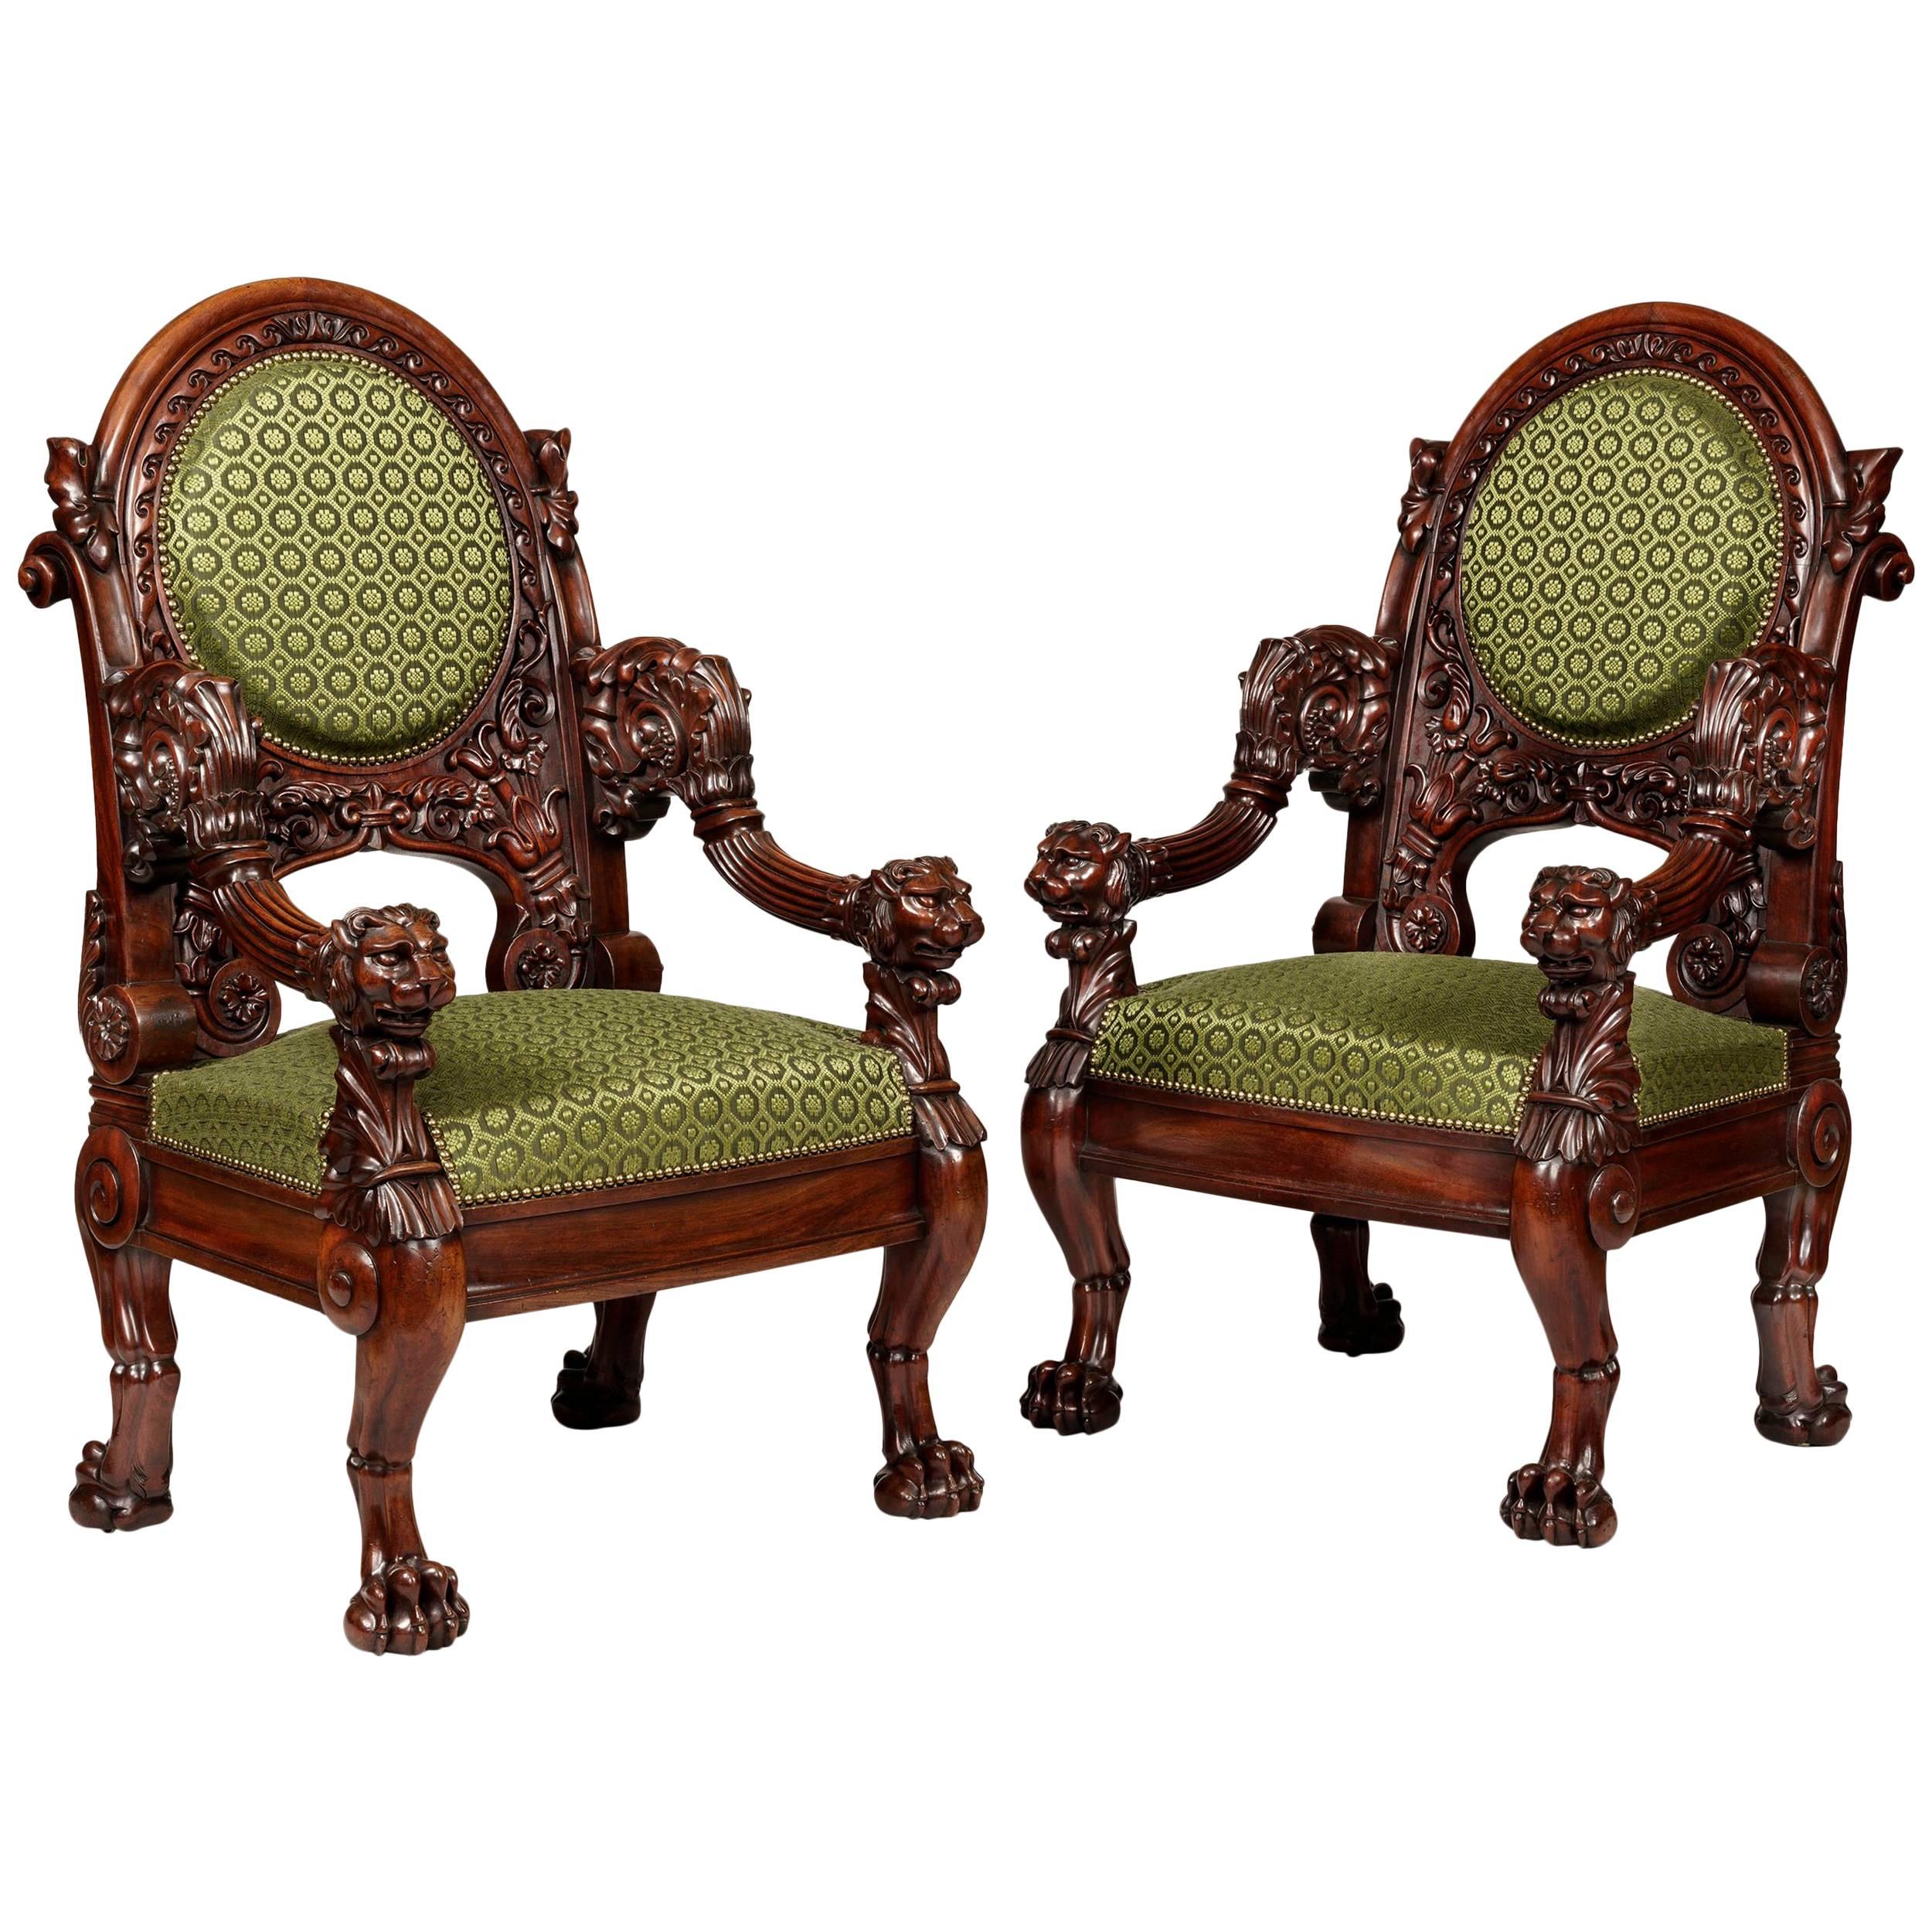 19th Century French Pair of Carved Mahogany and Green Horsehair Fabric Armchairs